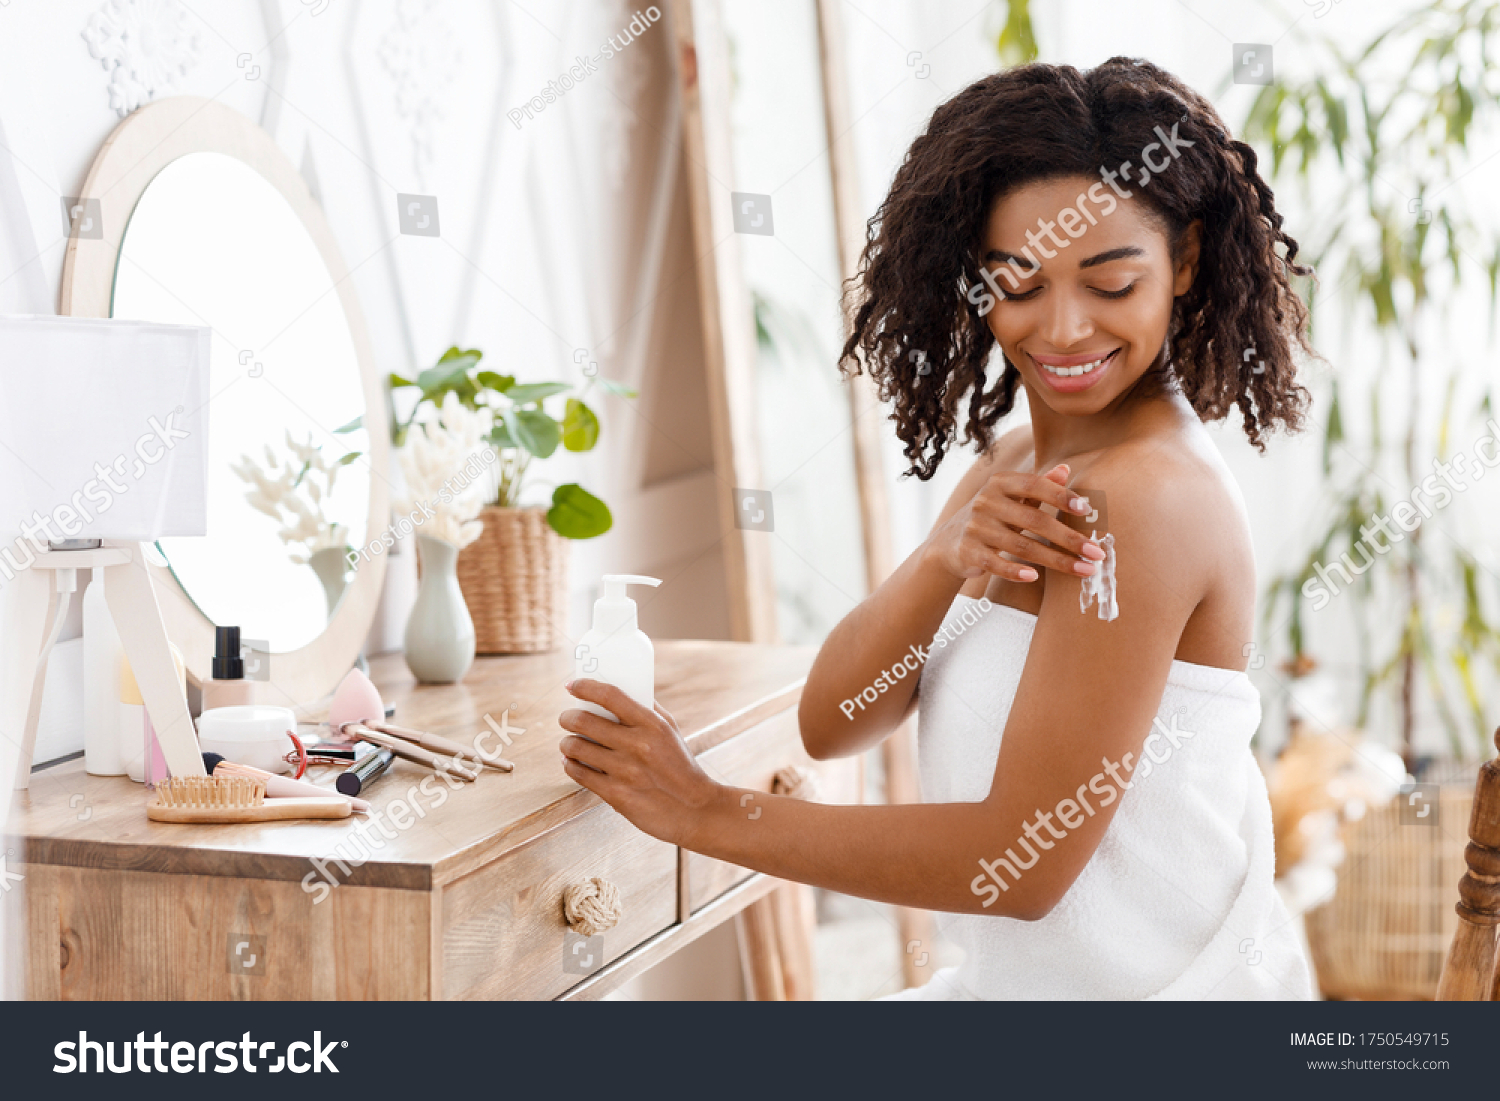 Skin Nutrition. Smiling Attractive Black Woman In Towel Applying Body Lotion, Pampering Herself After Bath, Sitting Wrapped In Towel At Dressing Table #1750549715